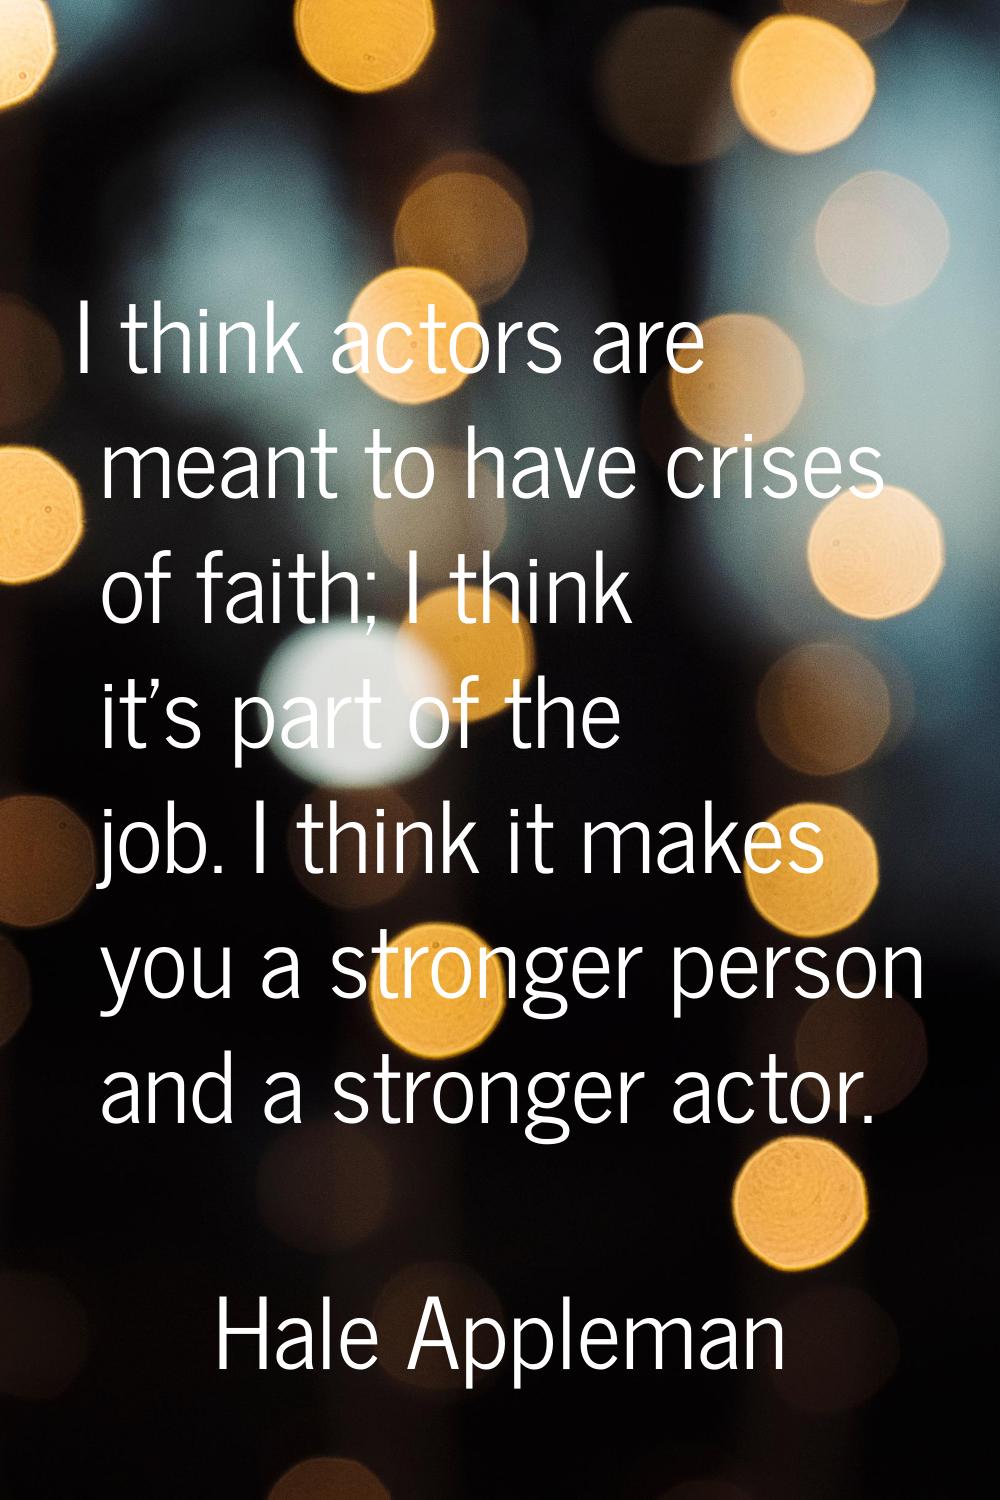 I think actors are meant to have crises of faith; I think it's part of the job. I think it makes yo